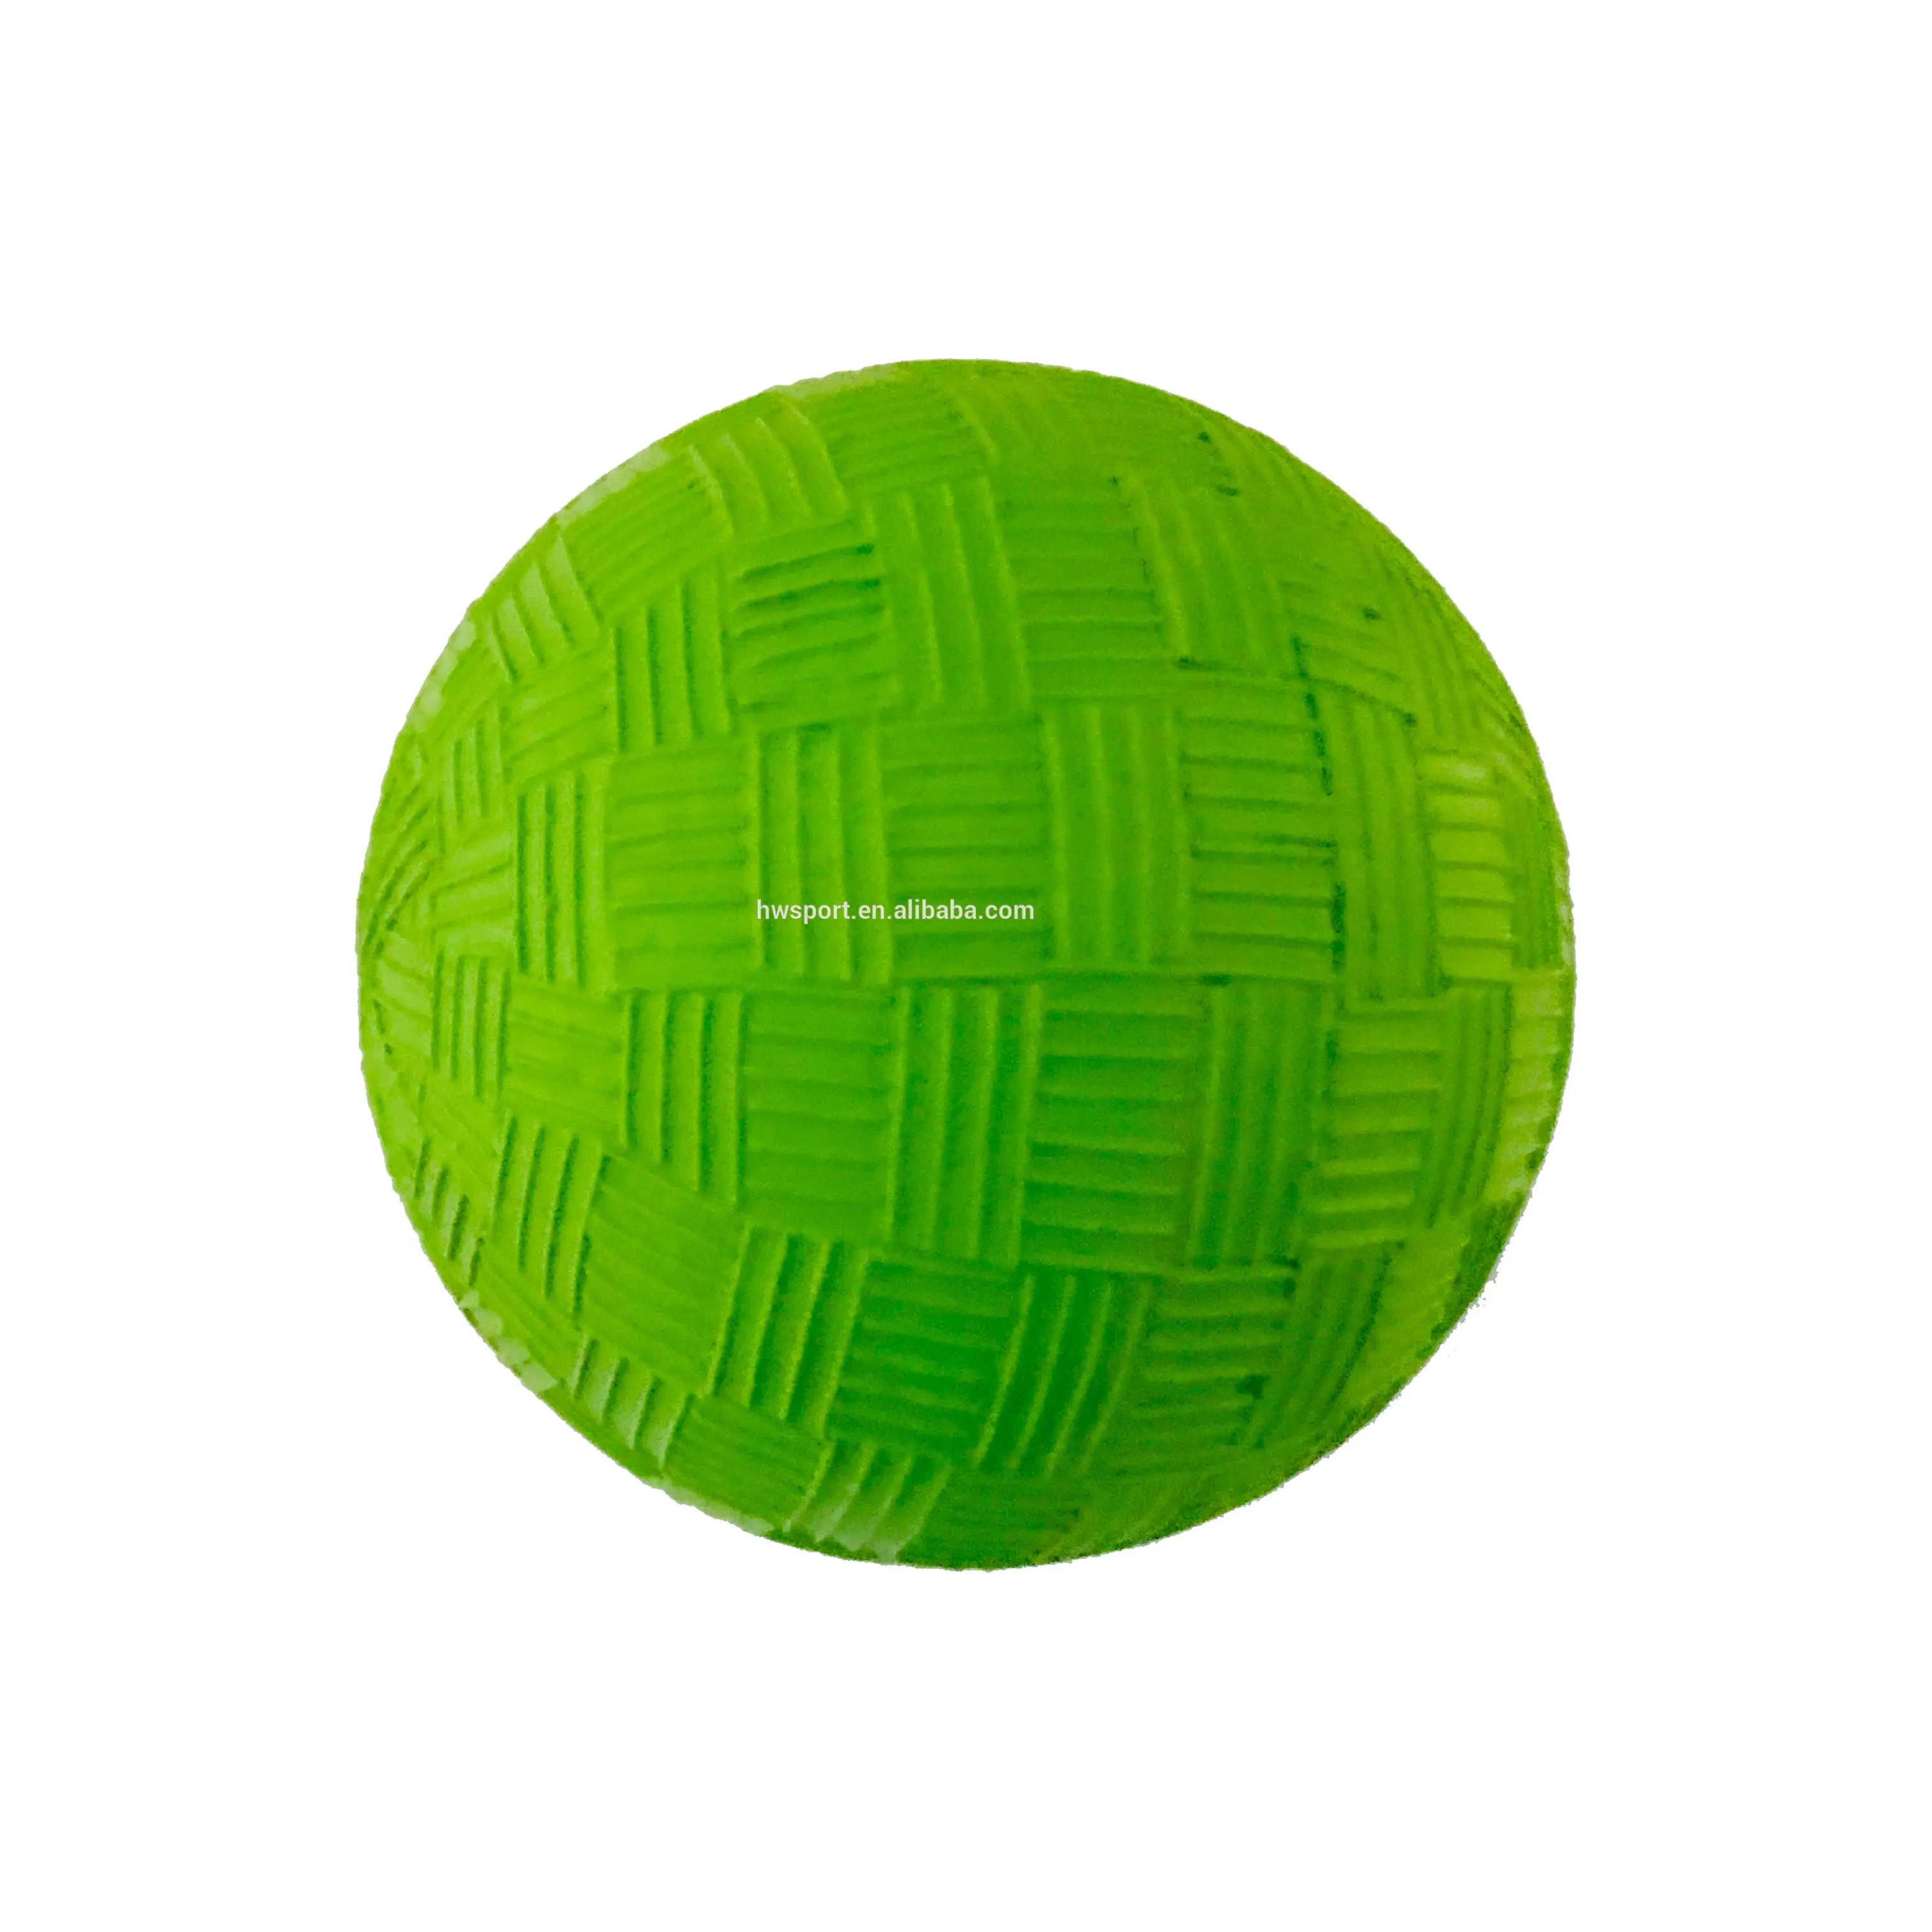 Outdoor sports hollow rubber bouncing ball beach paddle ball promotional green rough surface high quality juggling balls